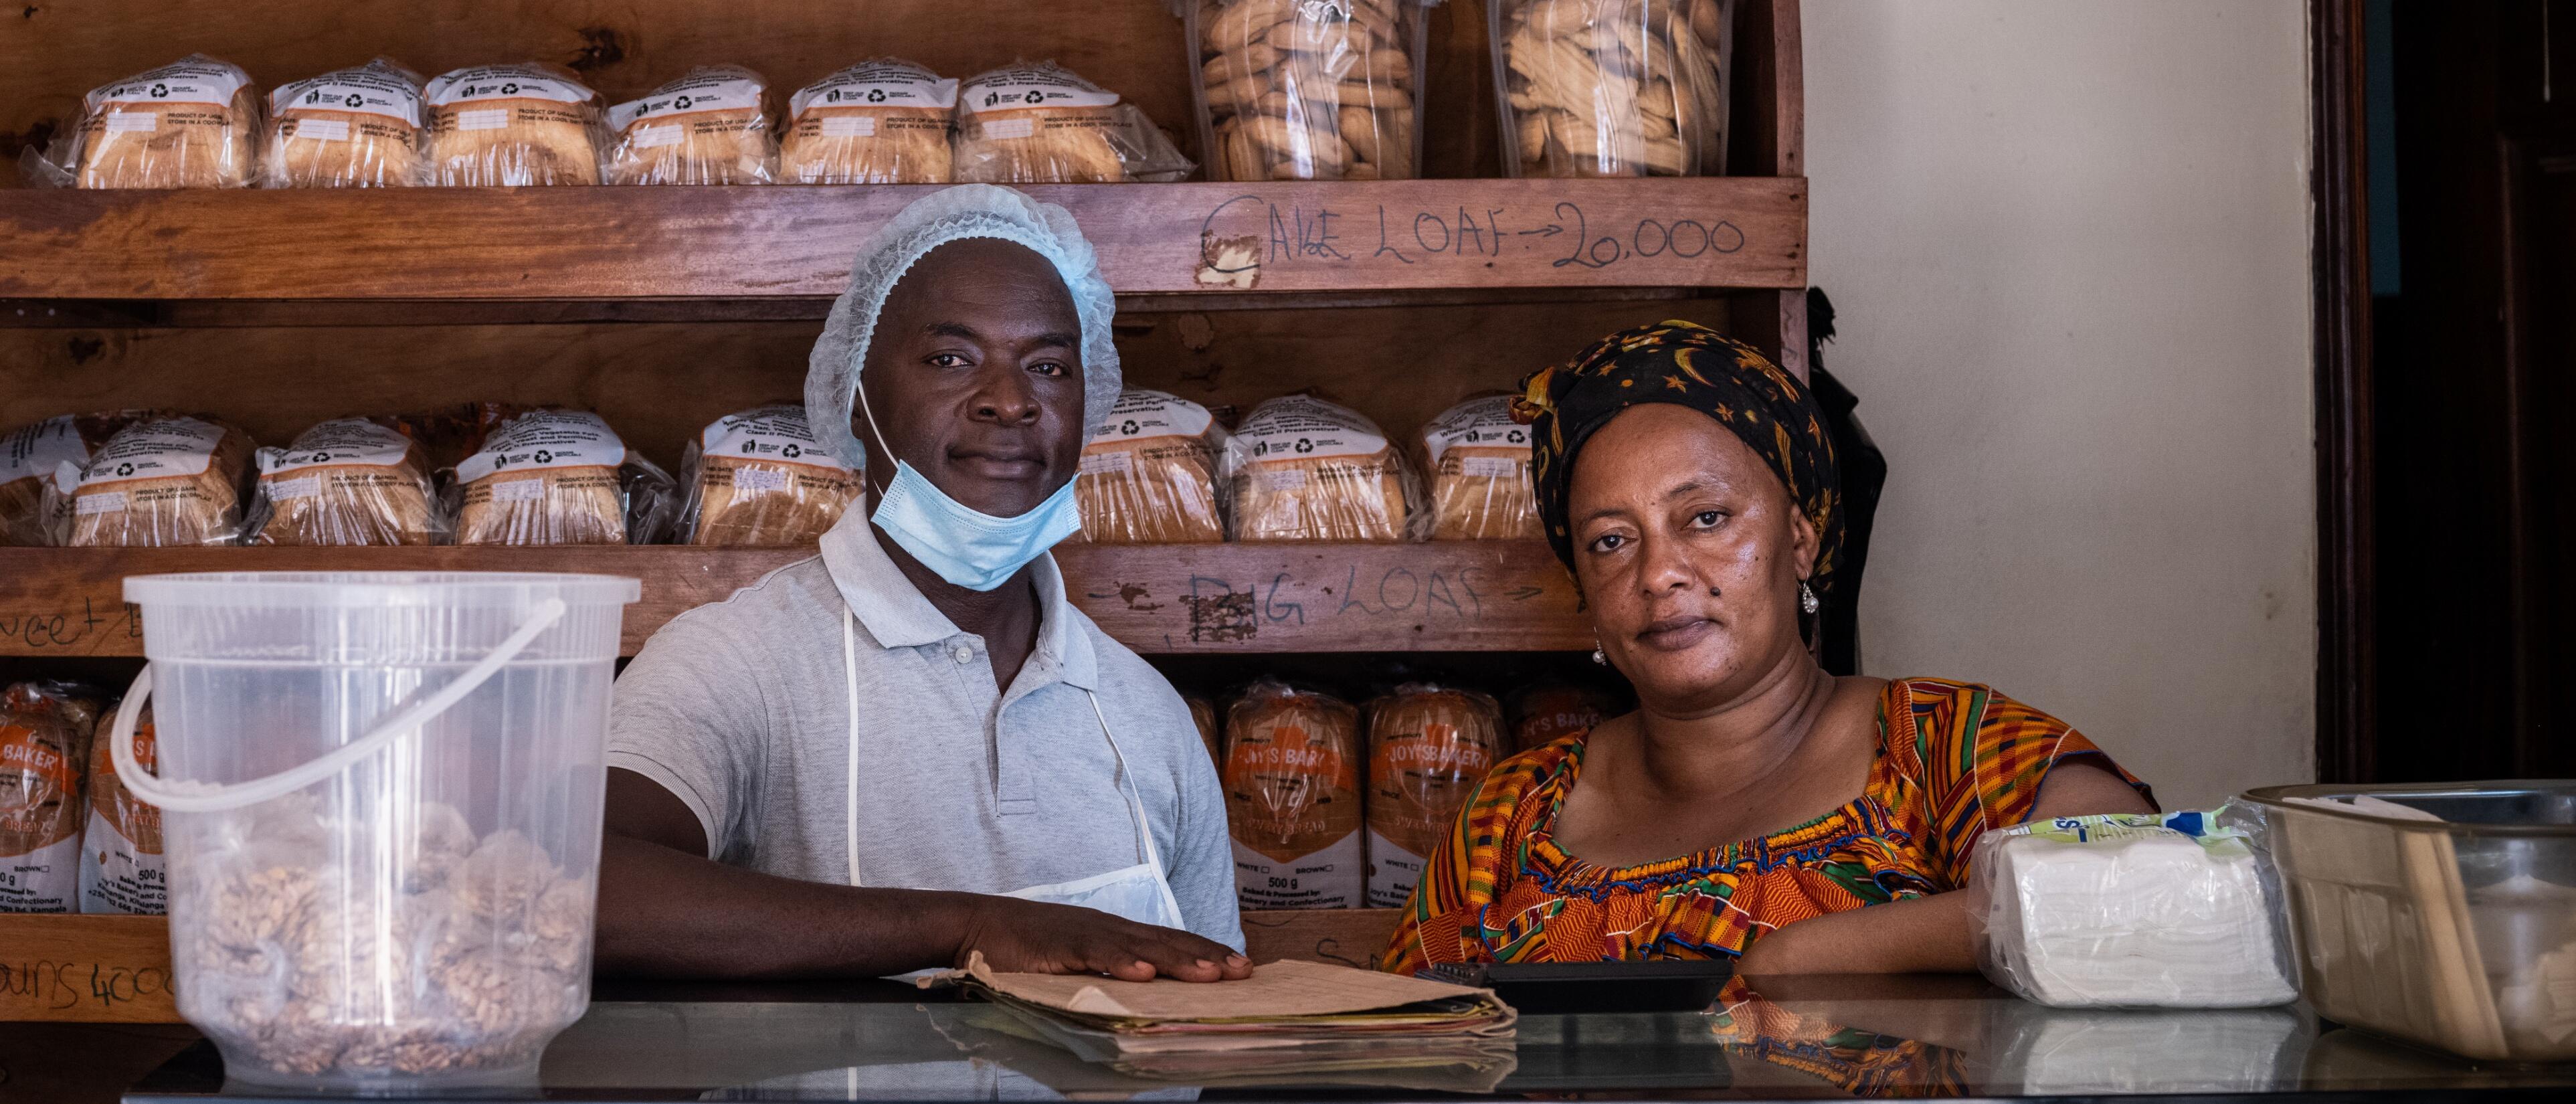 A Ugandan baker wearing a head covering, apron and lowered COVID face mask stands at his bakery counter with his mentee, a woman from South Sudan.